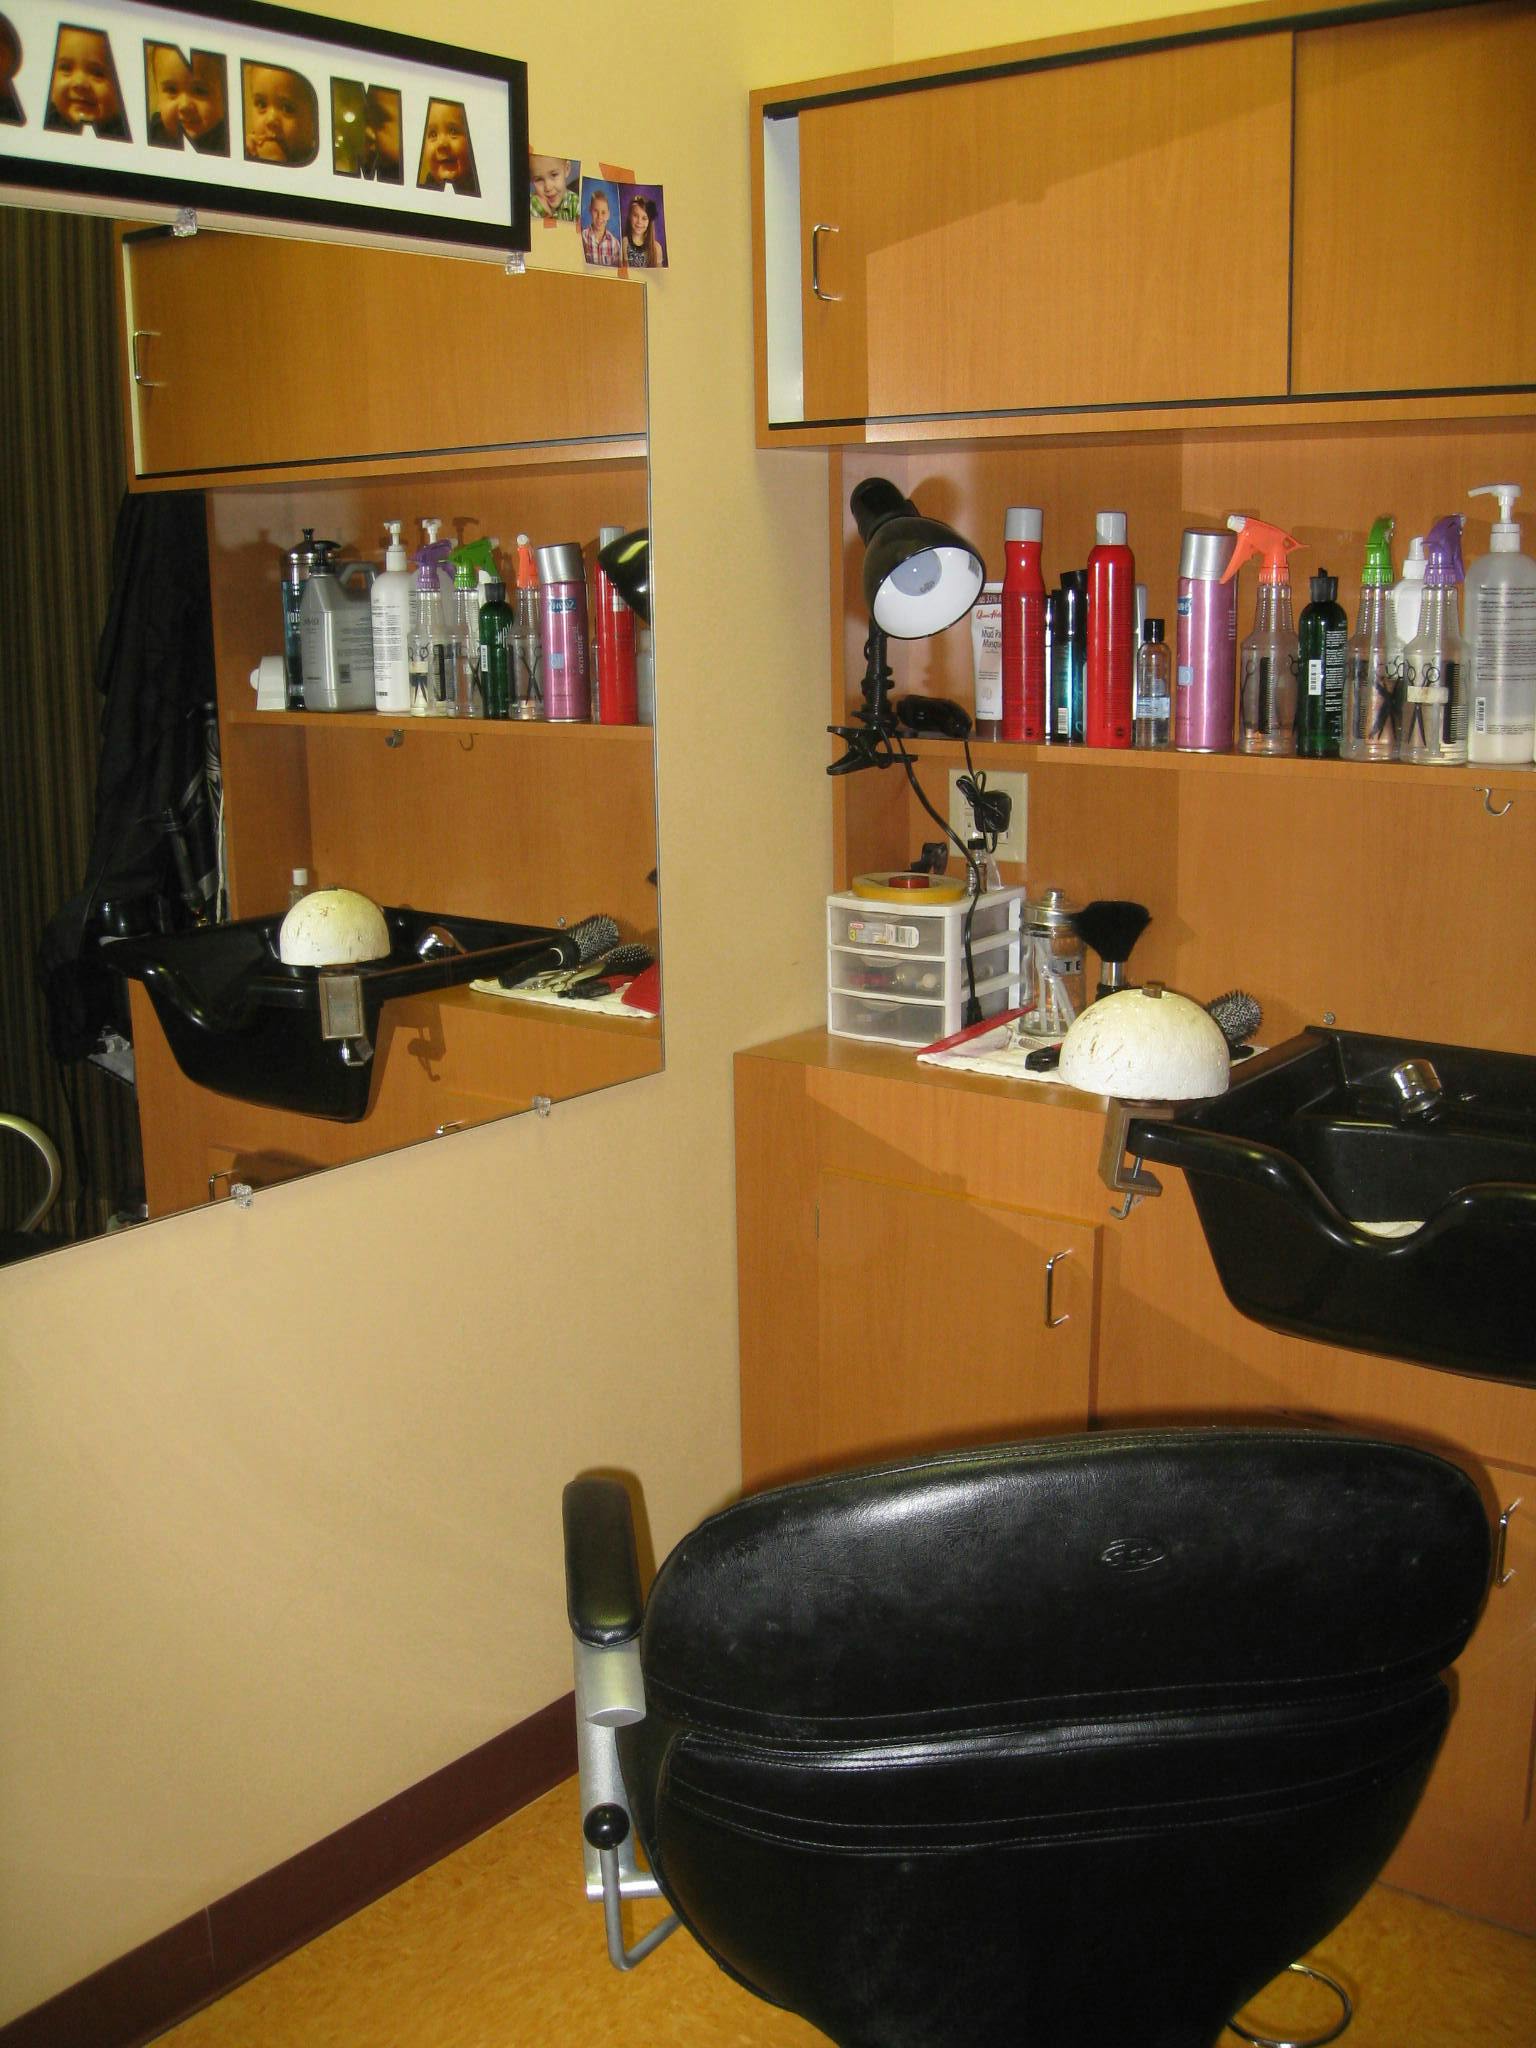 Style 24 specializes in non-surgical hair replacement and provides a separate salon room for your privacy.